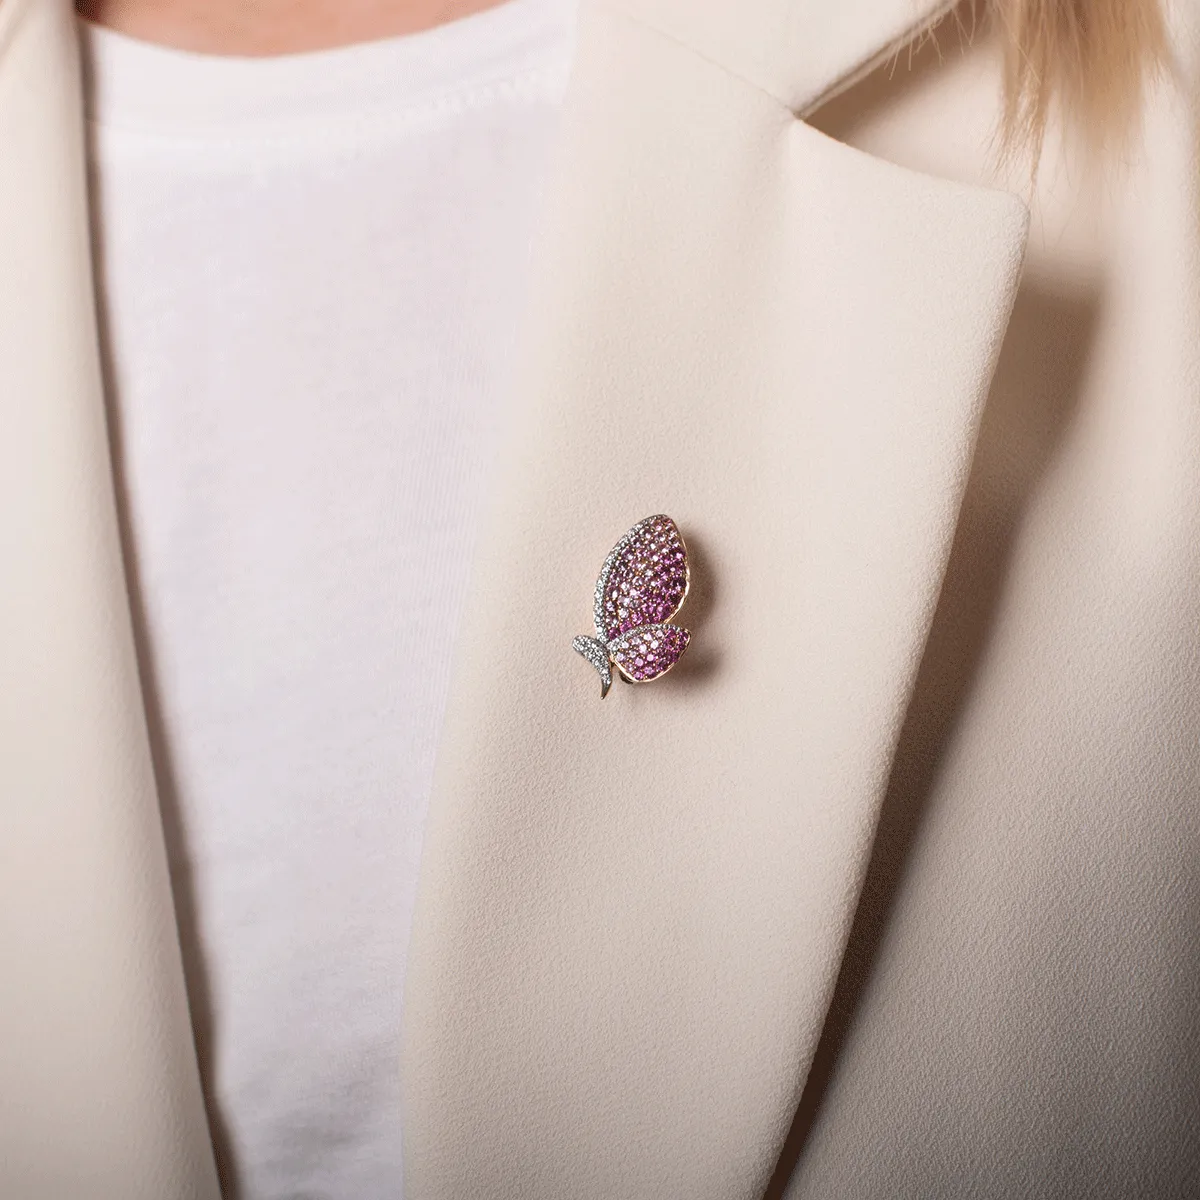 18K rose gold brooch with 1.43ct pink sapphire and 0.21ct diamonds